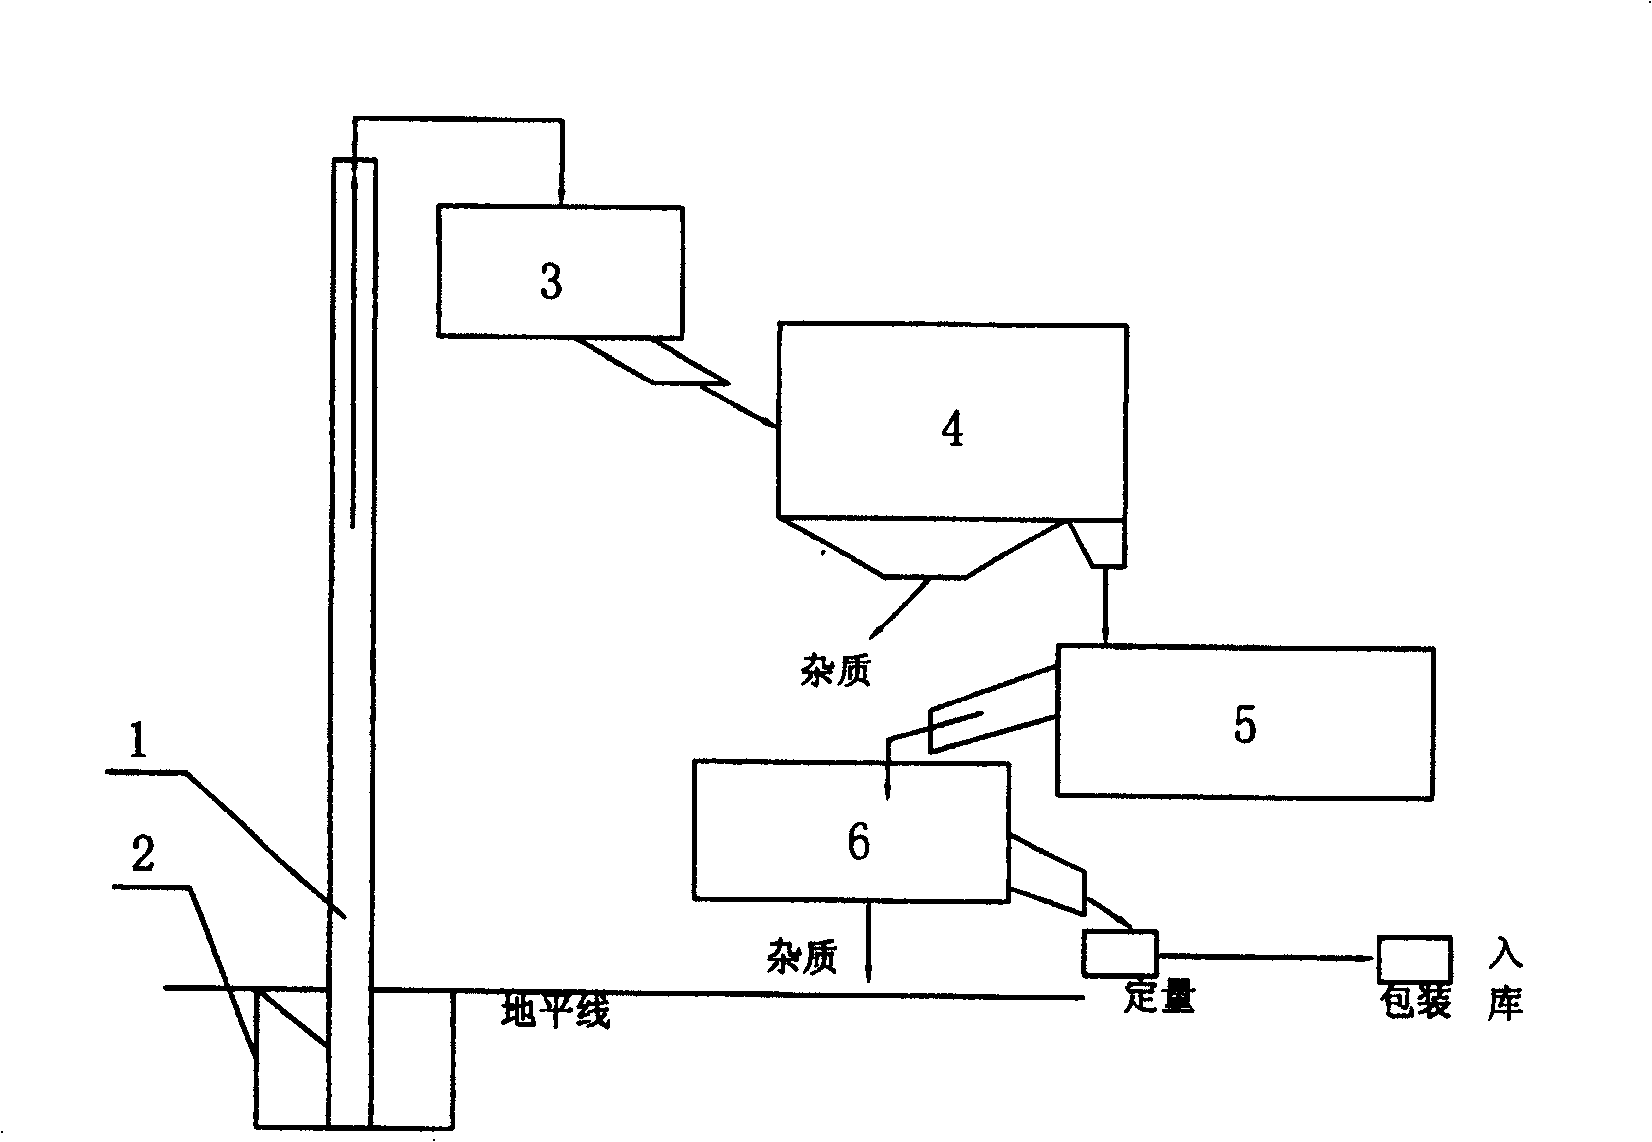 Water-saving environment friendly industrialized treatment system and method for cleaning beans